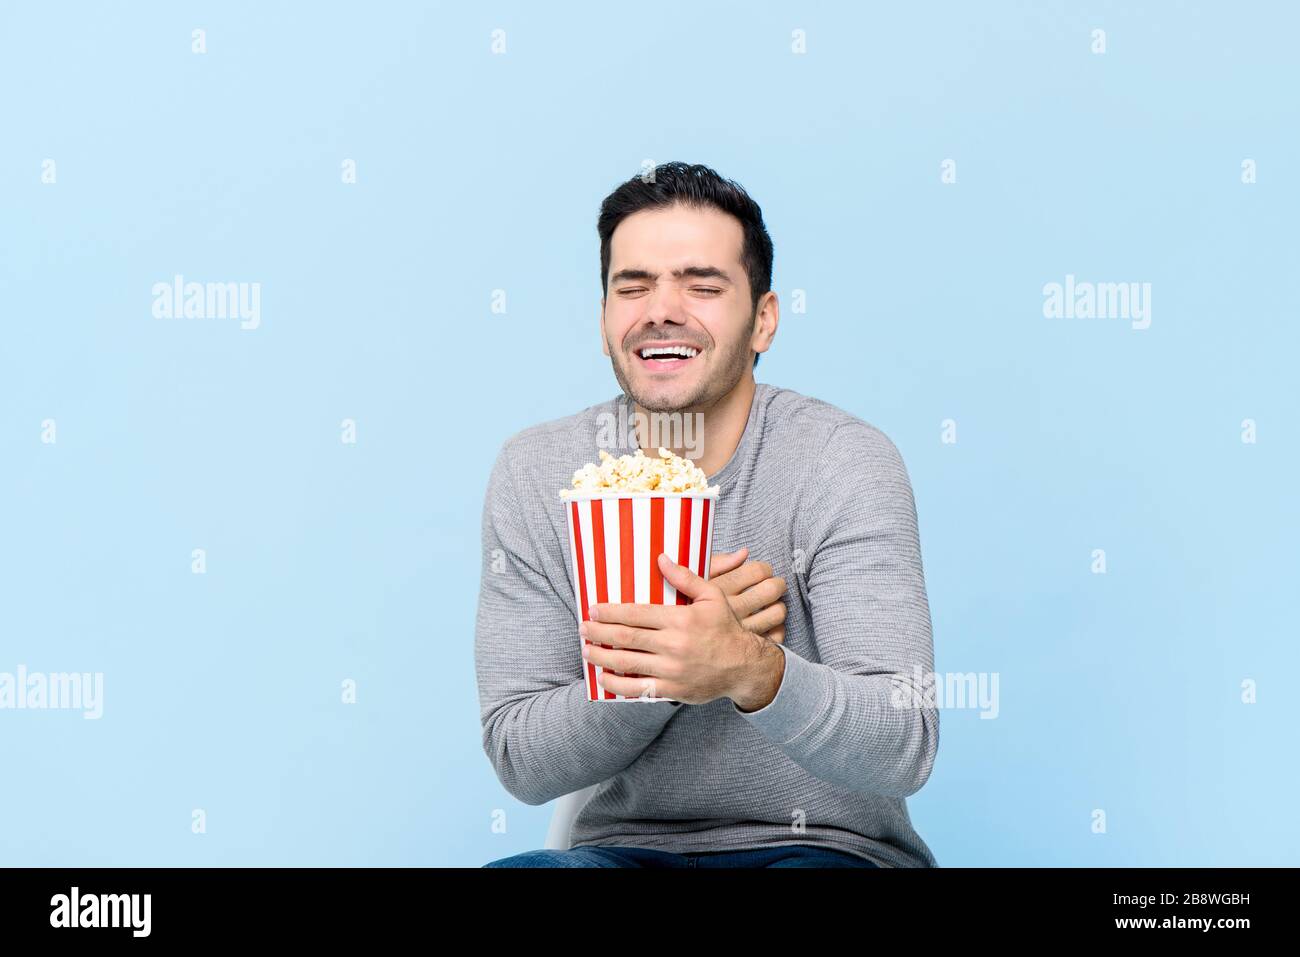 Young man holding popcorn laughing while watching movie isolated on light blue background Stock Photo